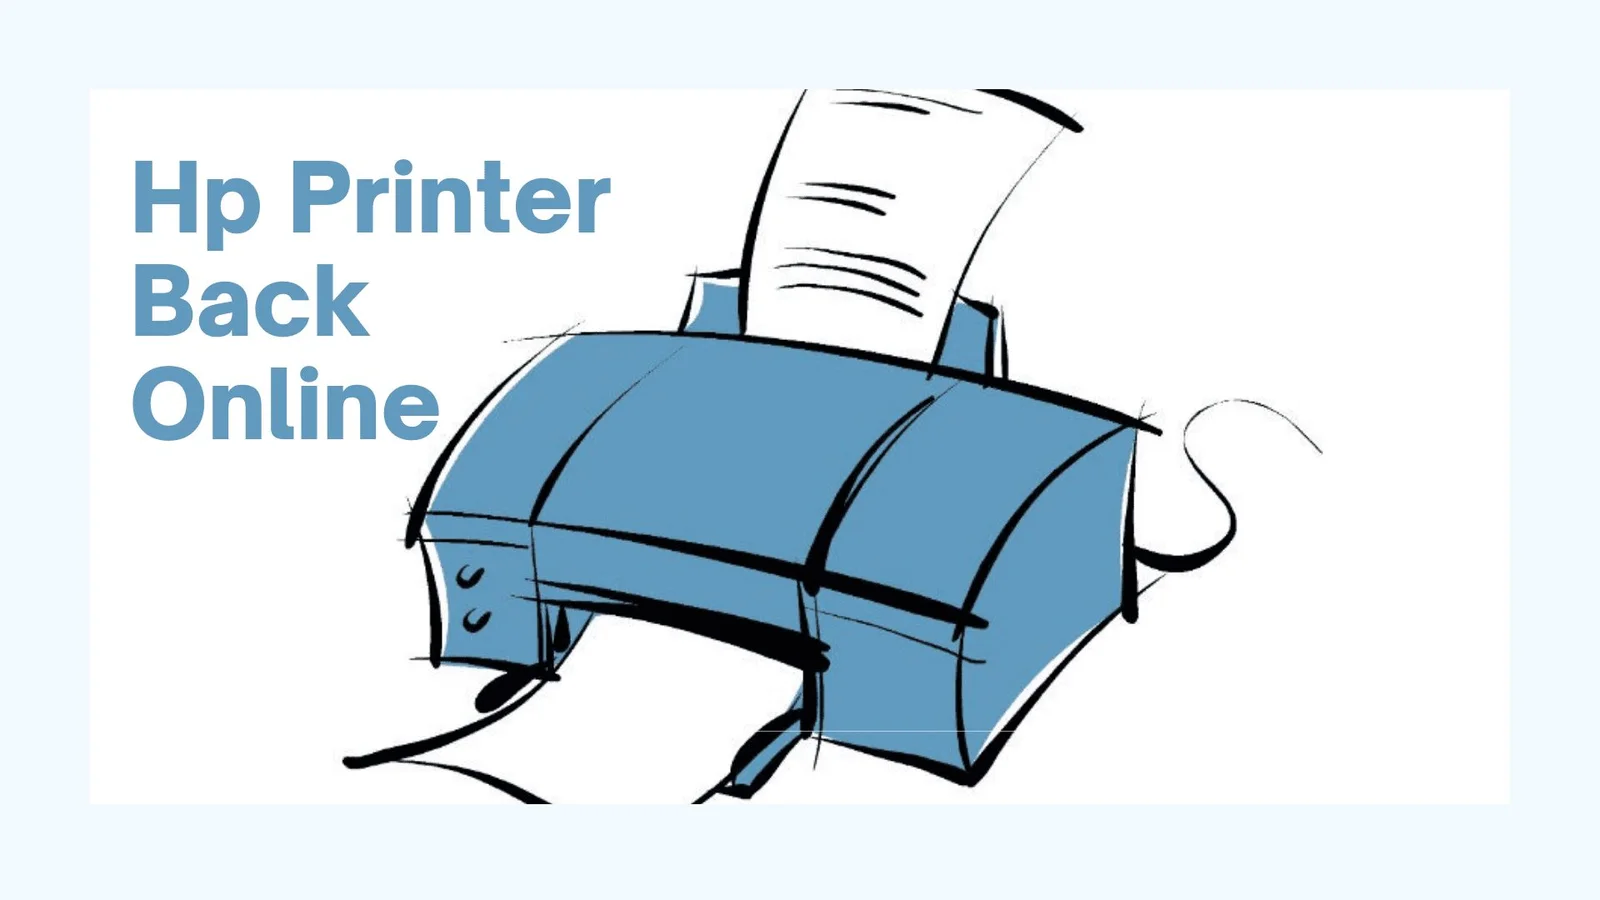 How to get the hp printer back online?